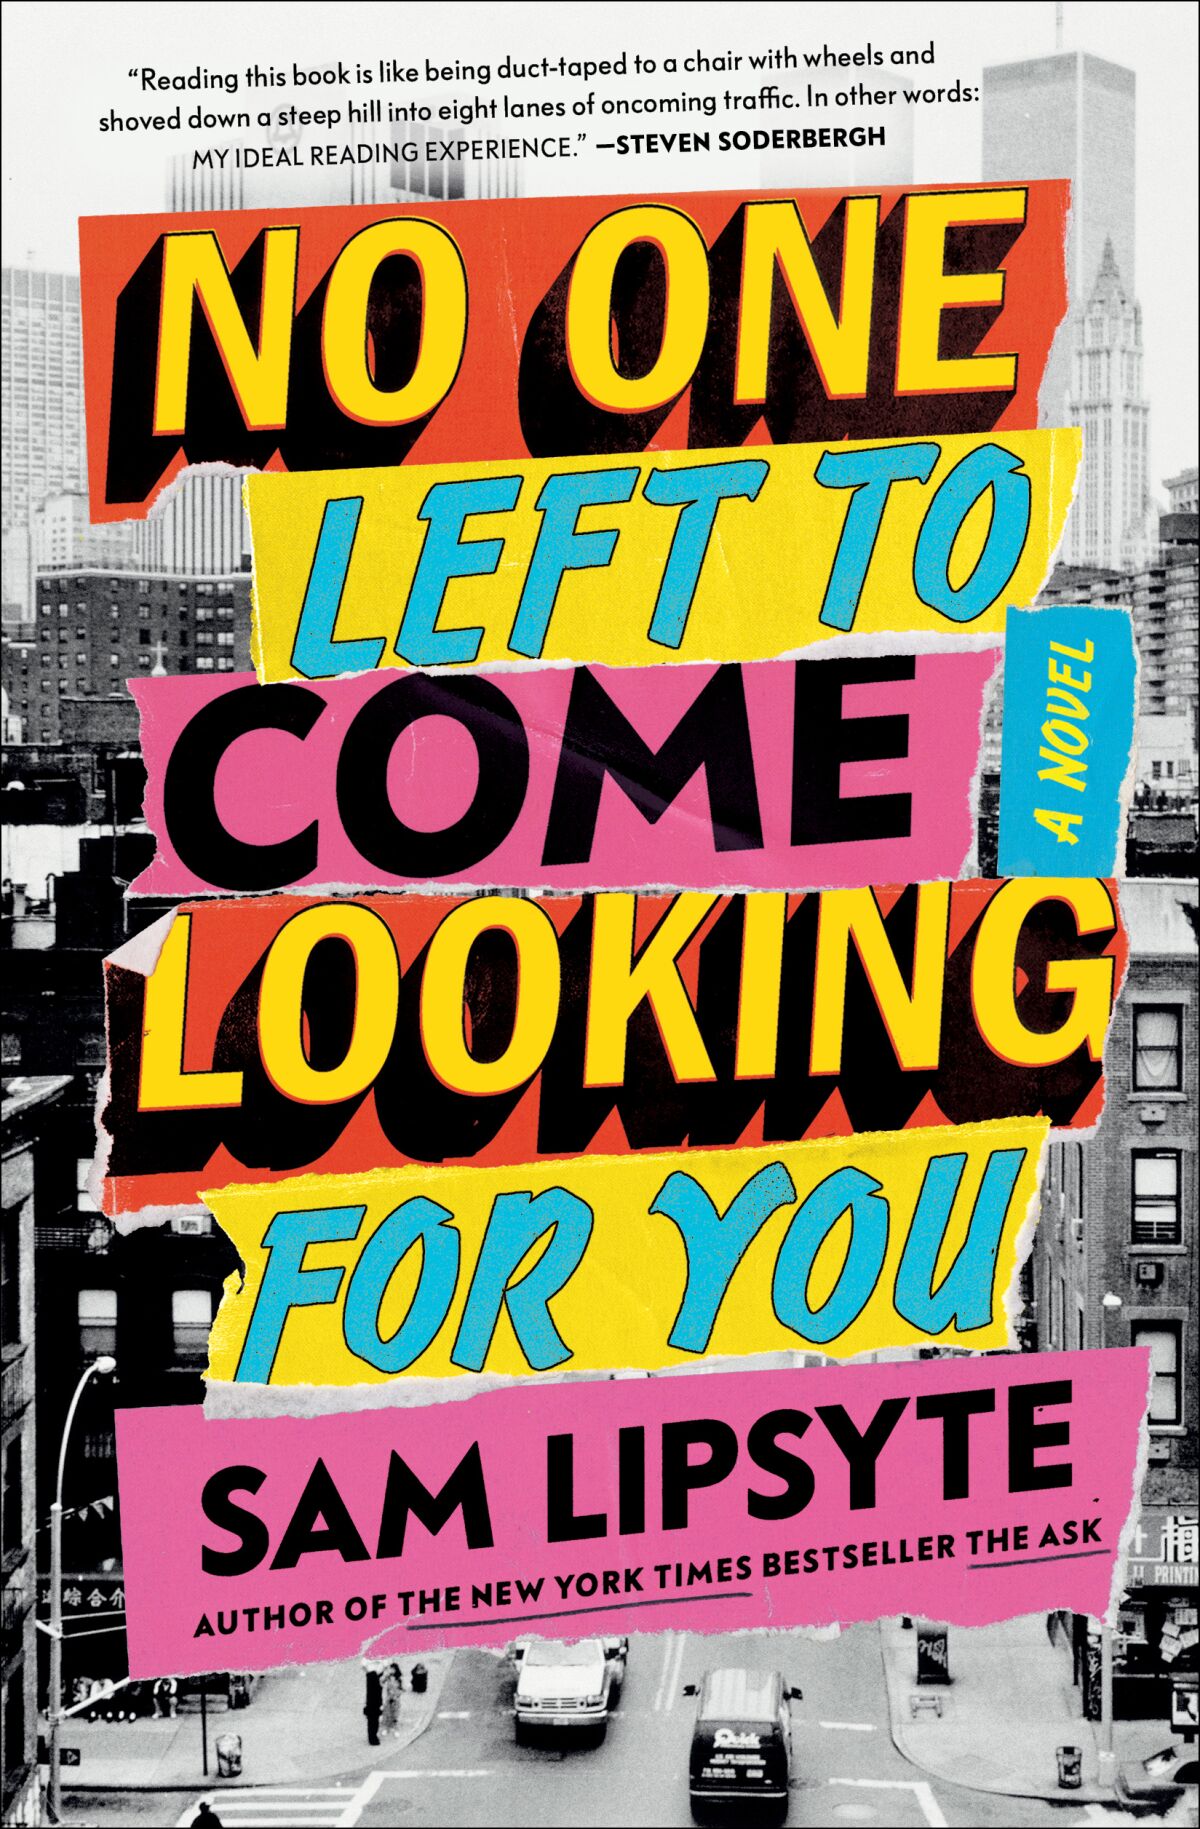 "No one's there to look for you anymore" by Sam Lipsyte